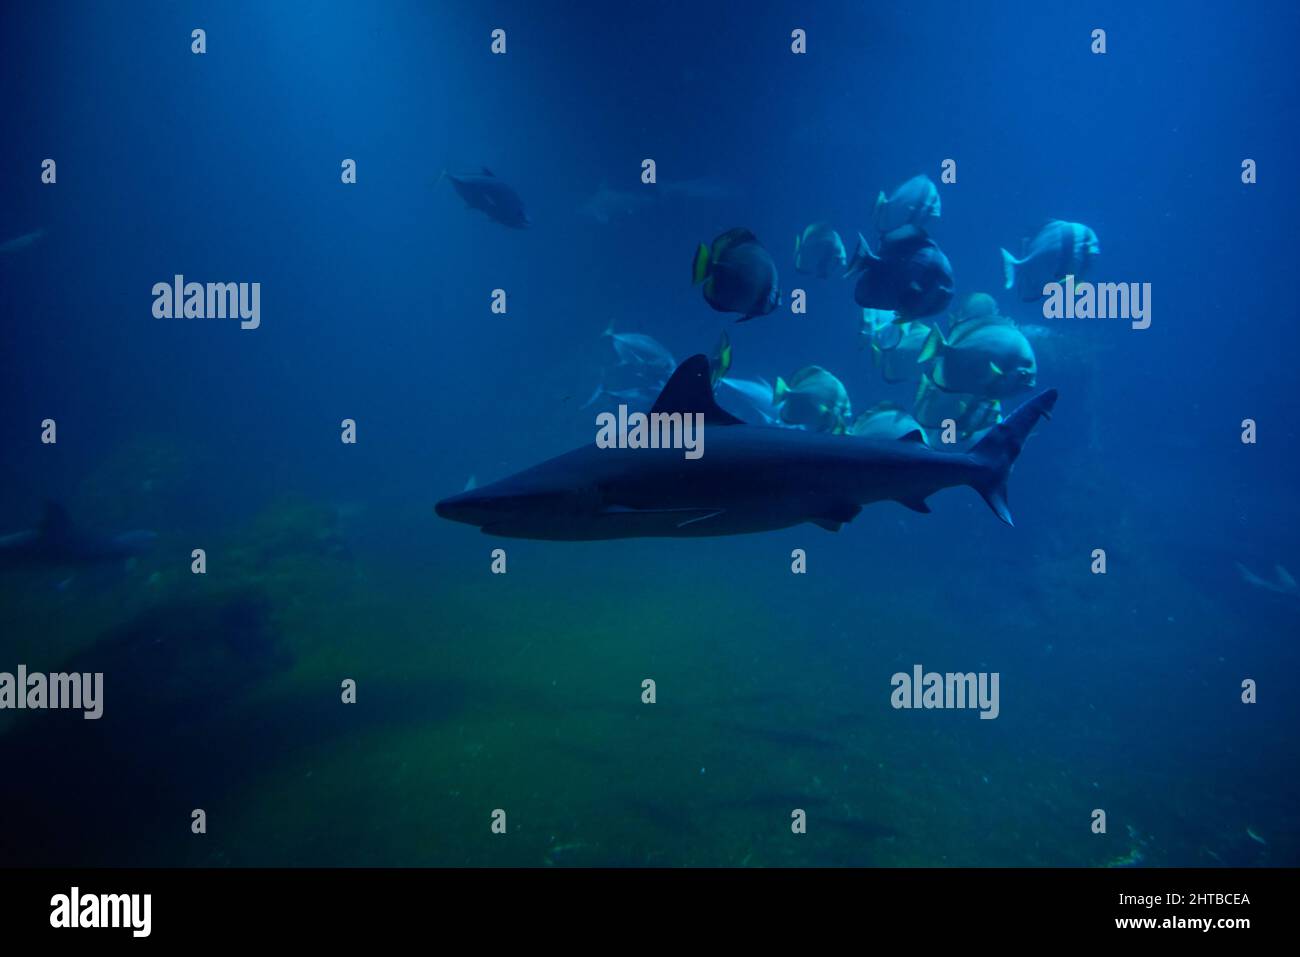 Large shark and other fishes in the deep under water, sea fish in zoo aquarium, close up Stock Photo